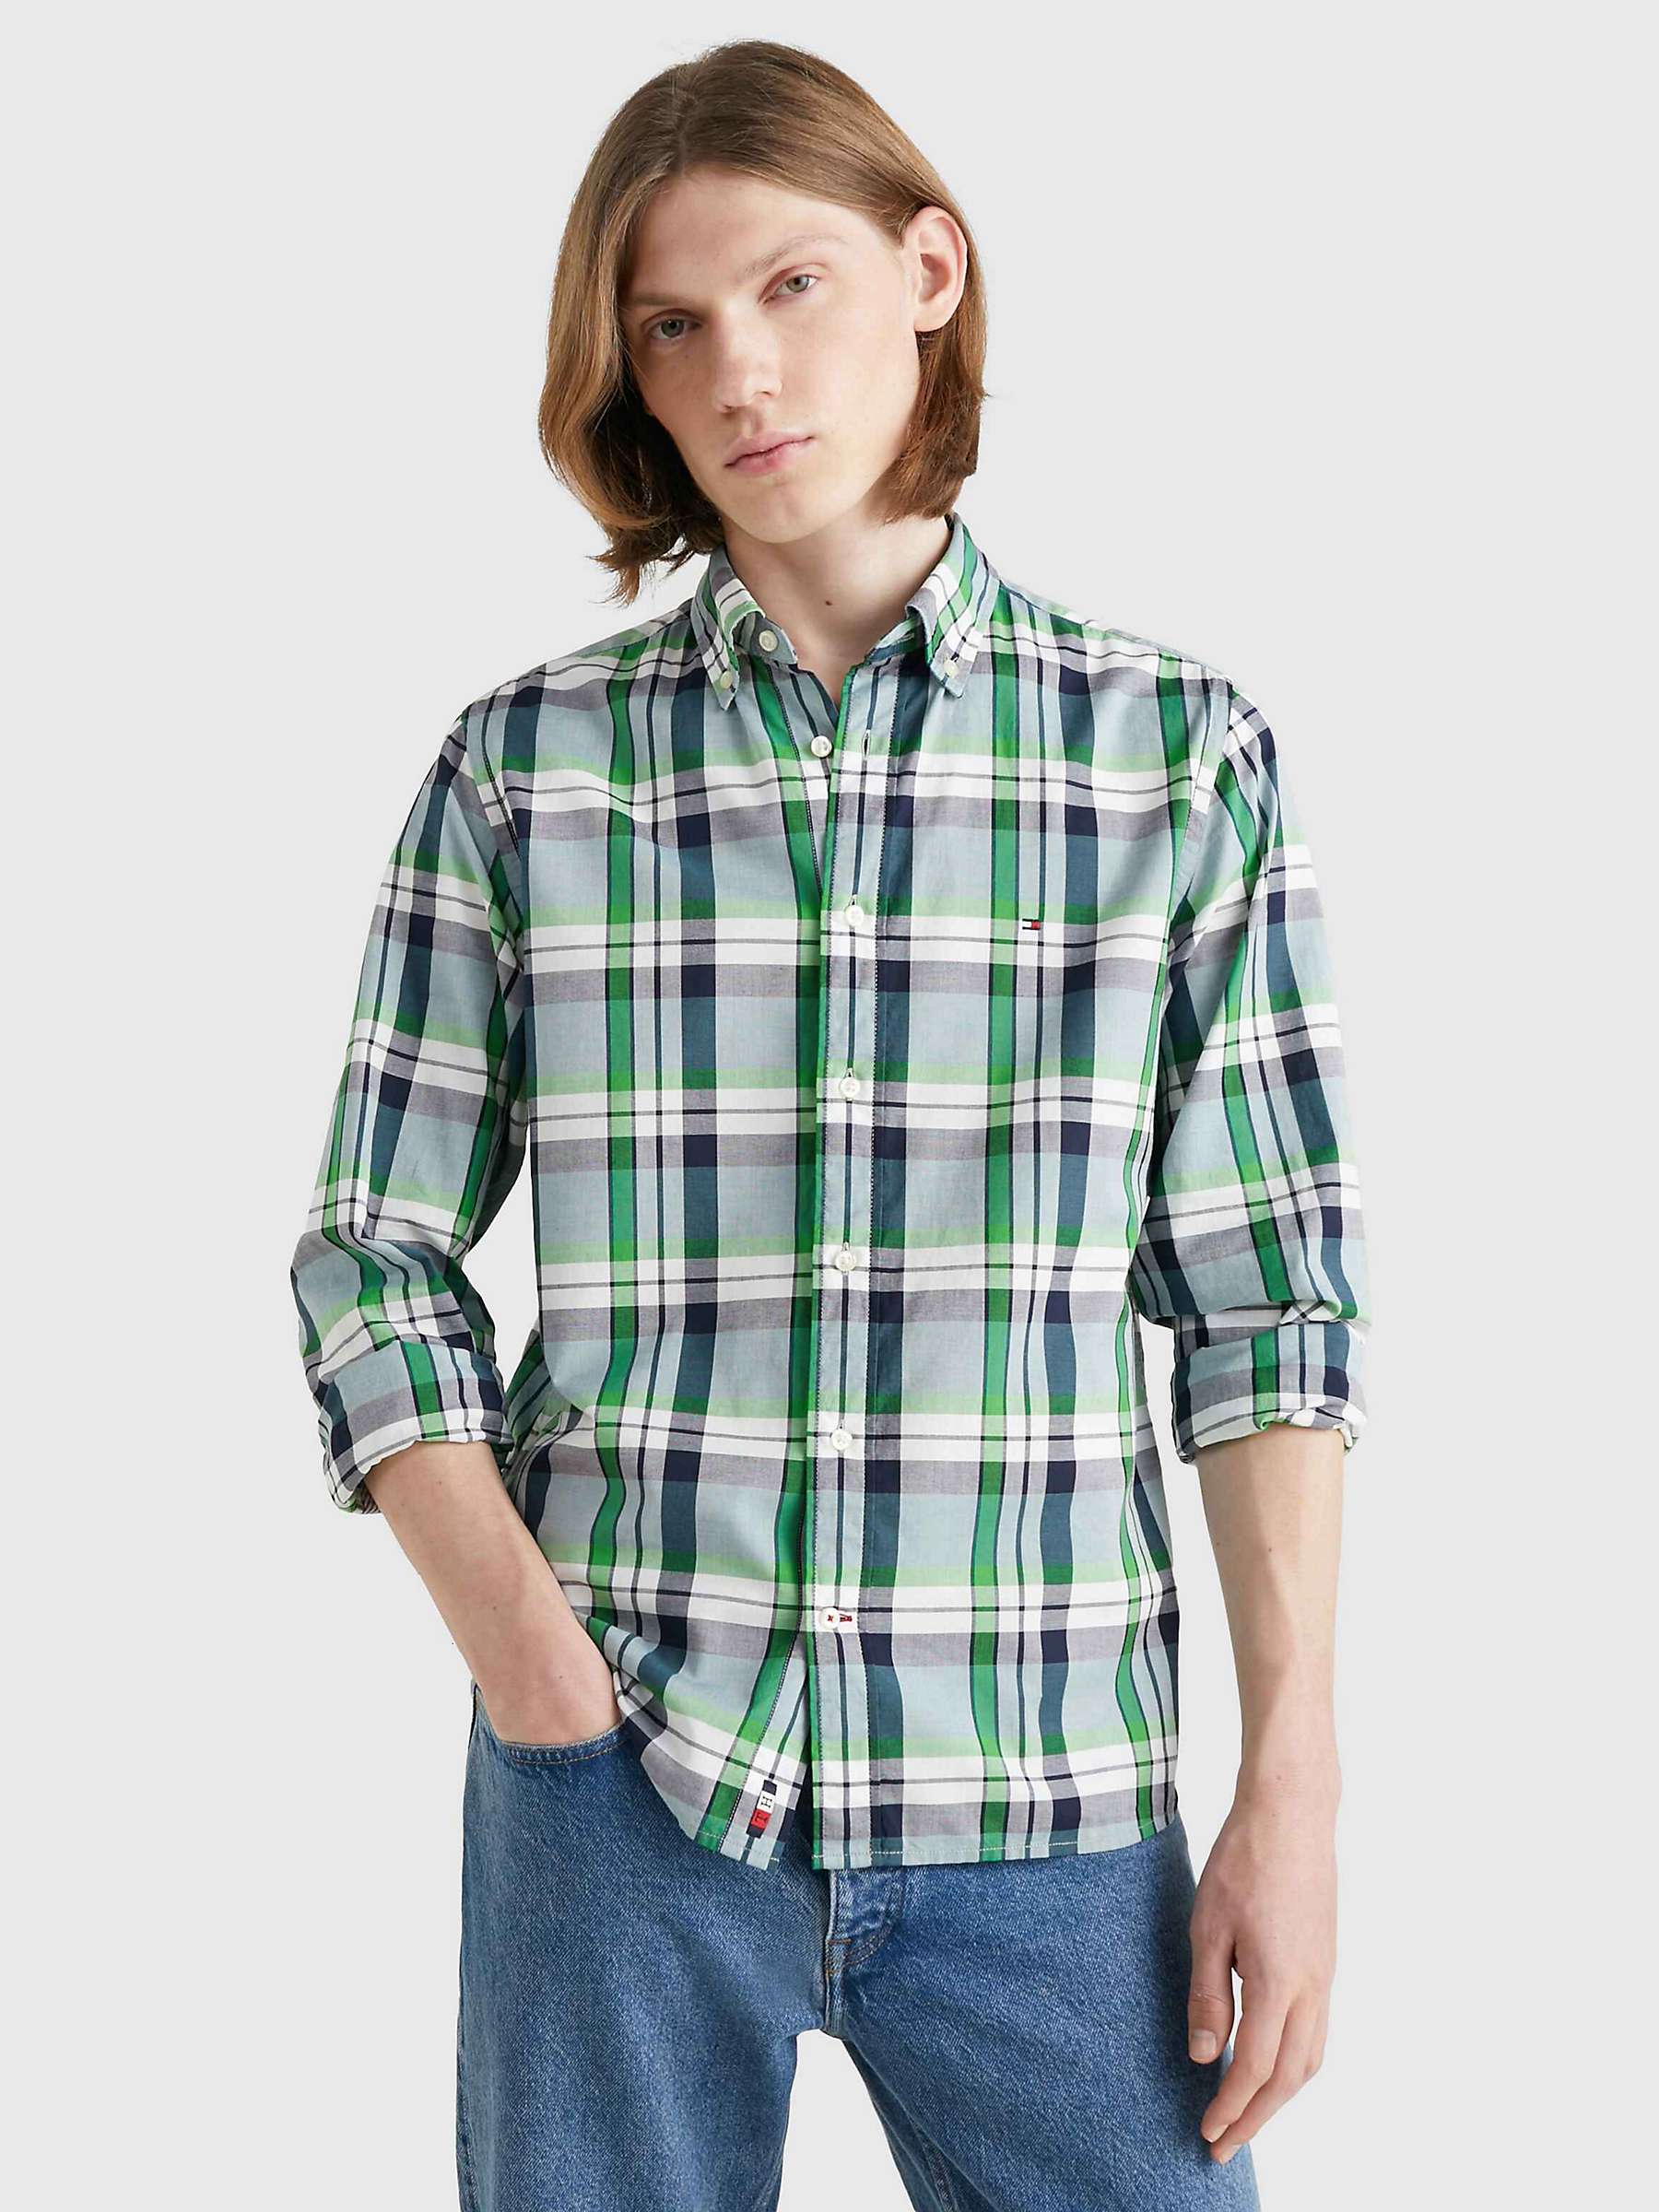 Buy Tommy Hilfiger Tartan Check Shirt, Frosted Green/Multi Online at johnlewis.com